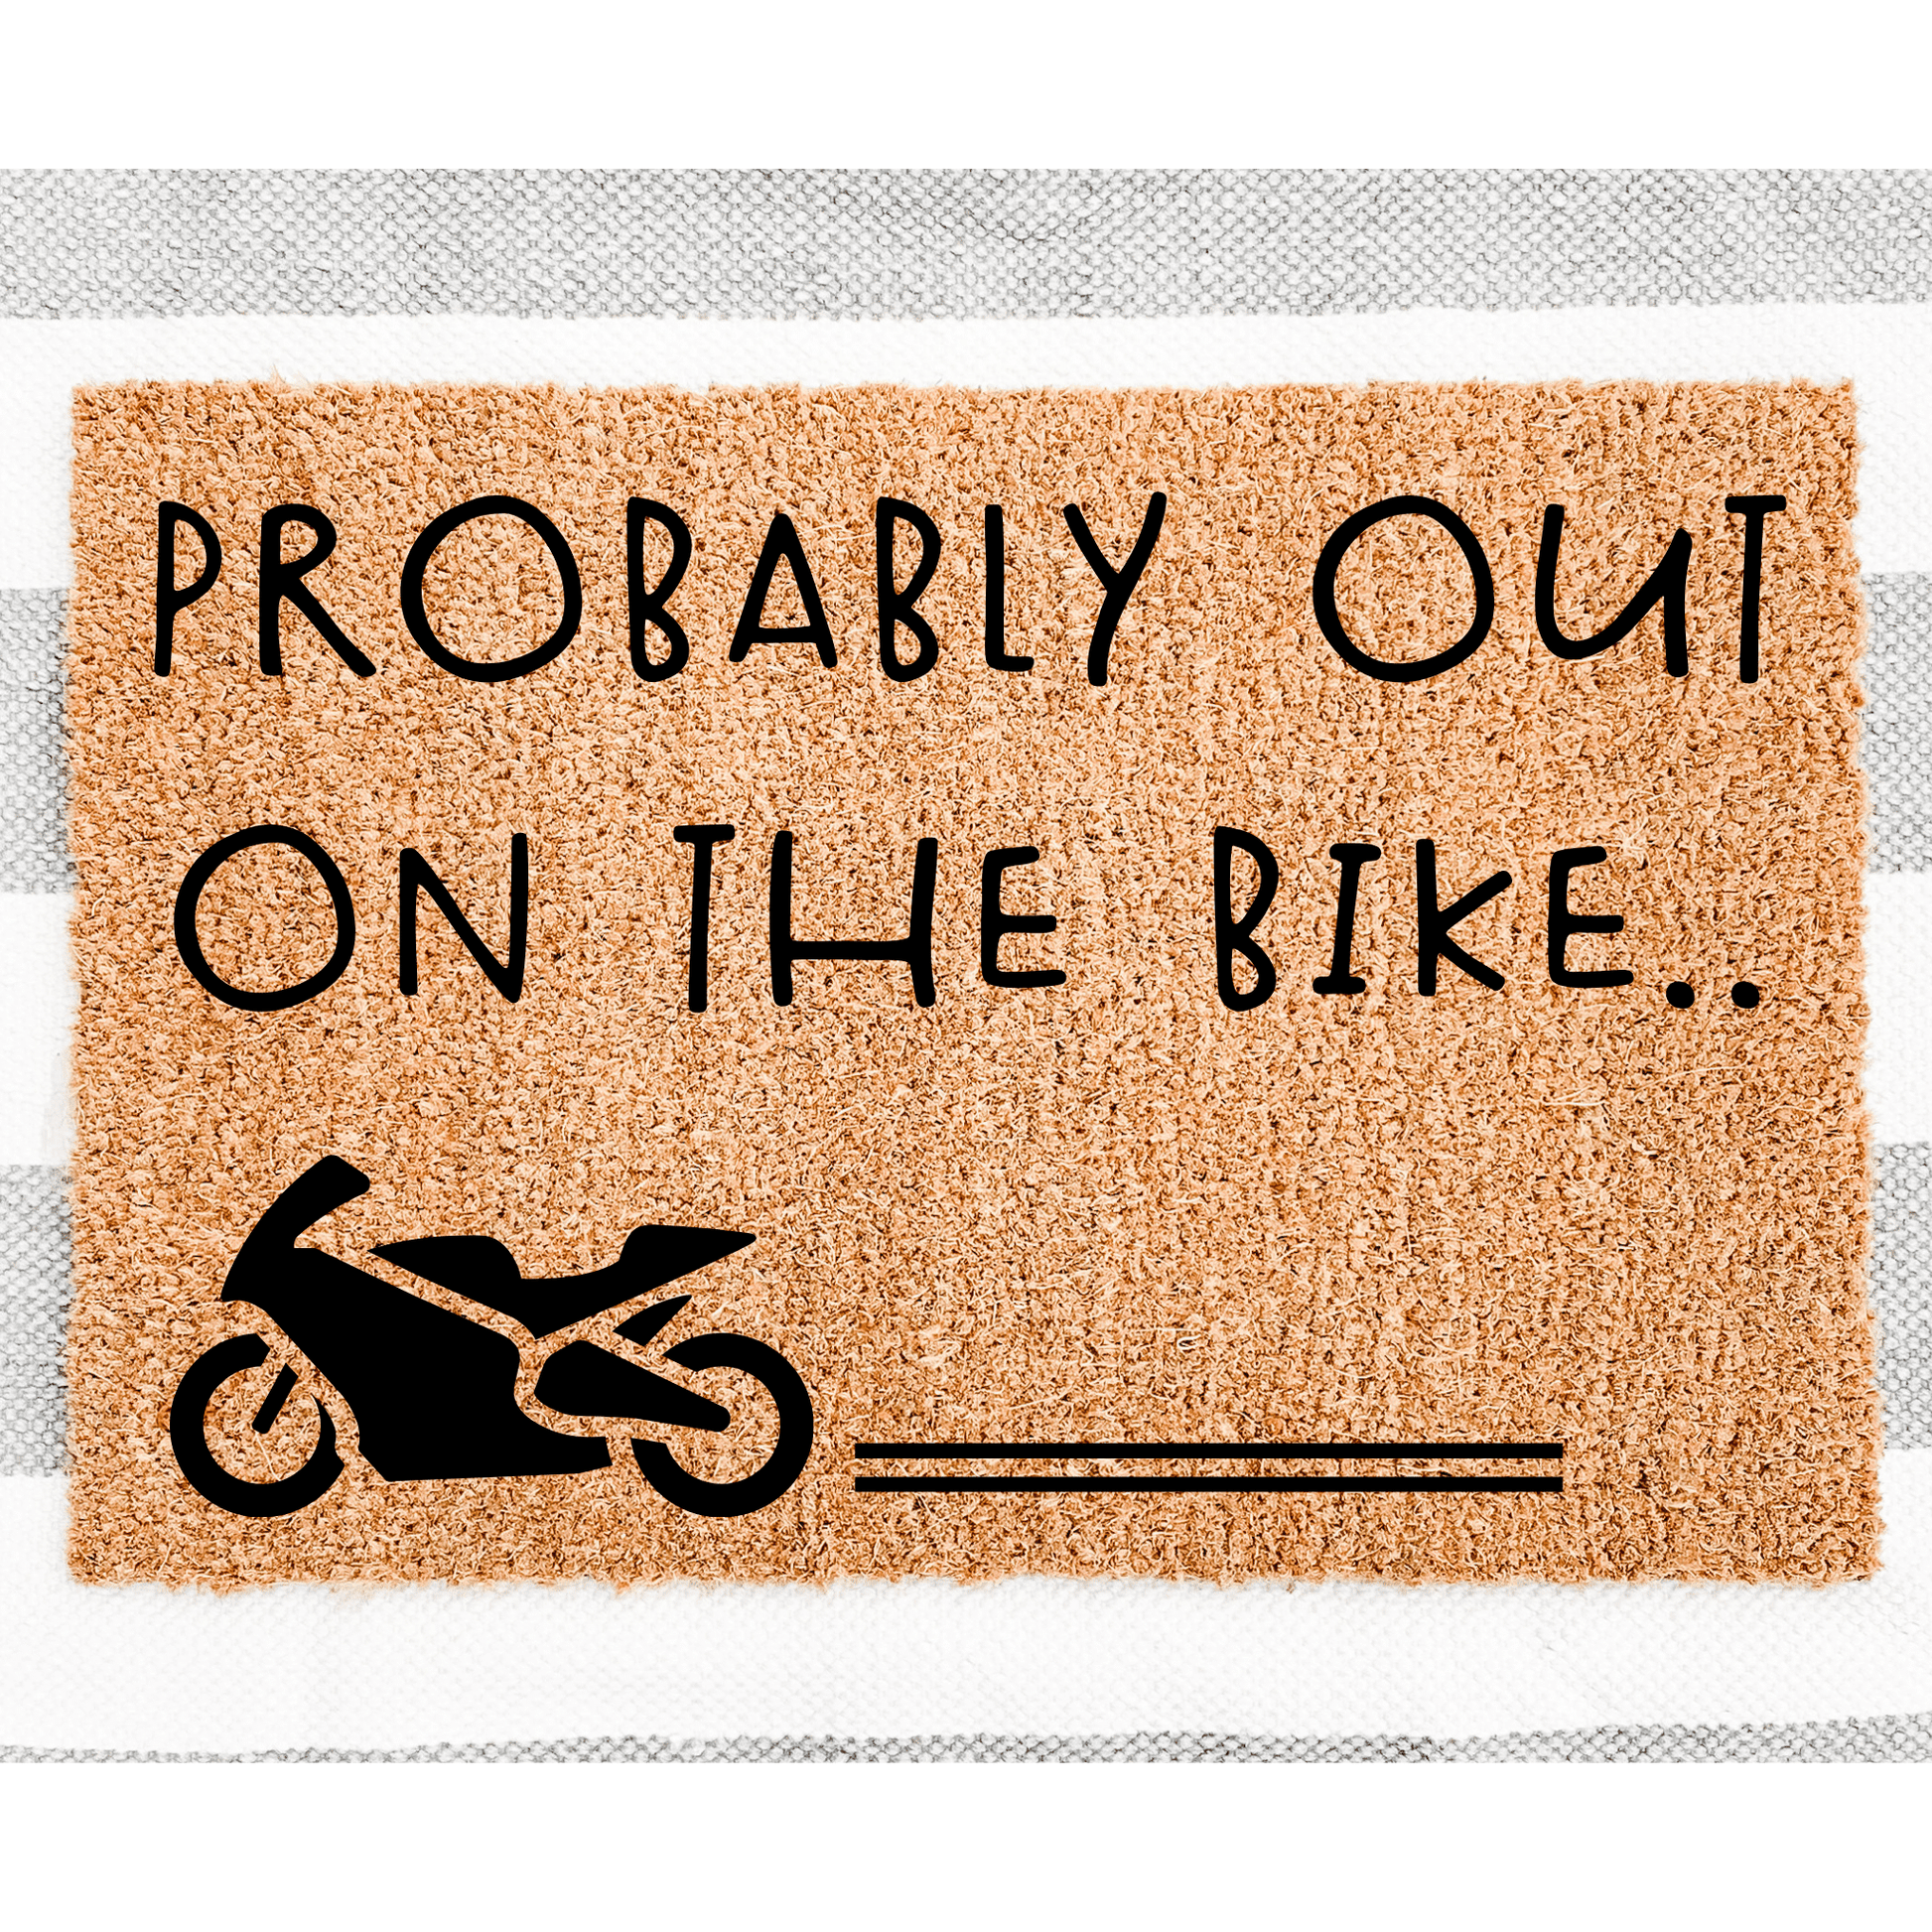 Probably out on the bike doormat - Personalised Doormat Australia